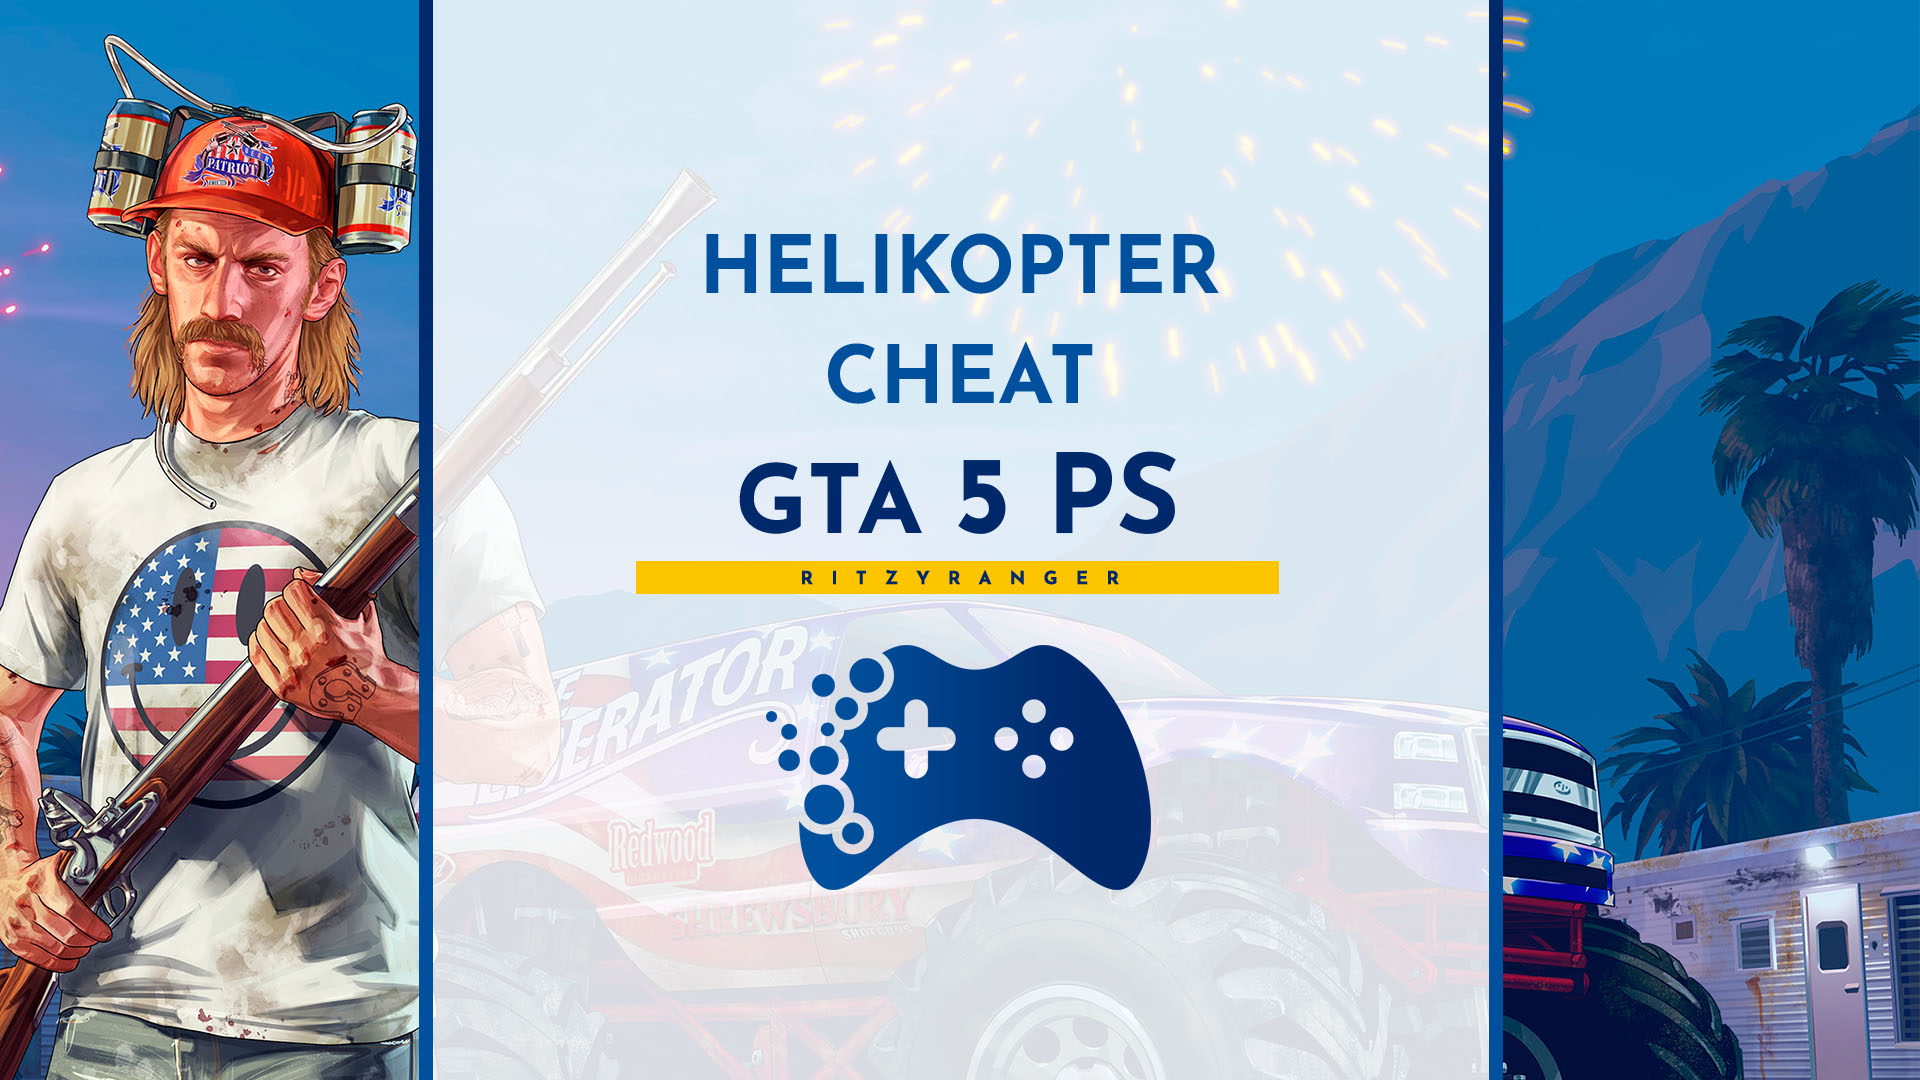 gta 5 helicopter cheat ps